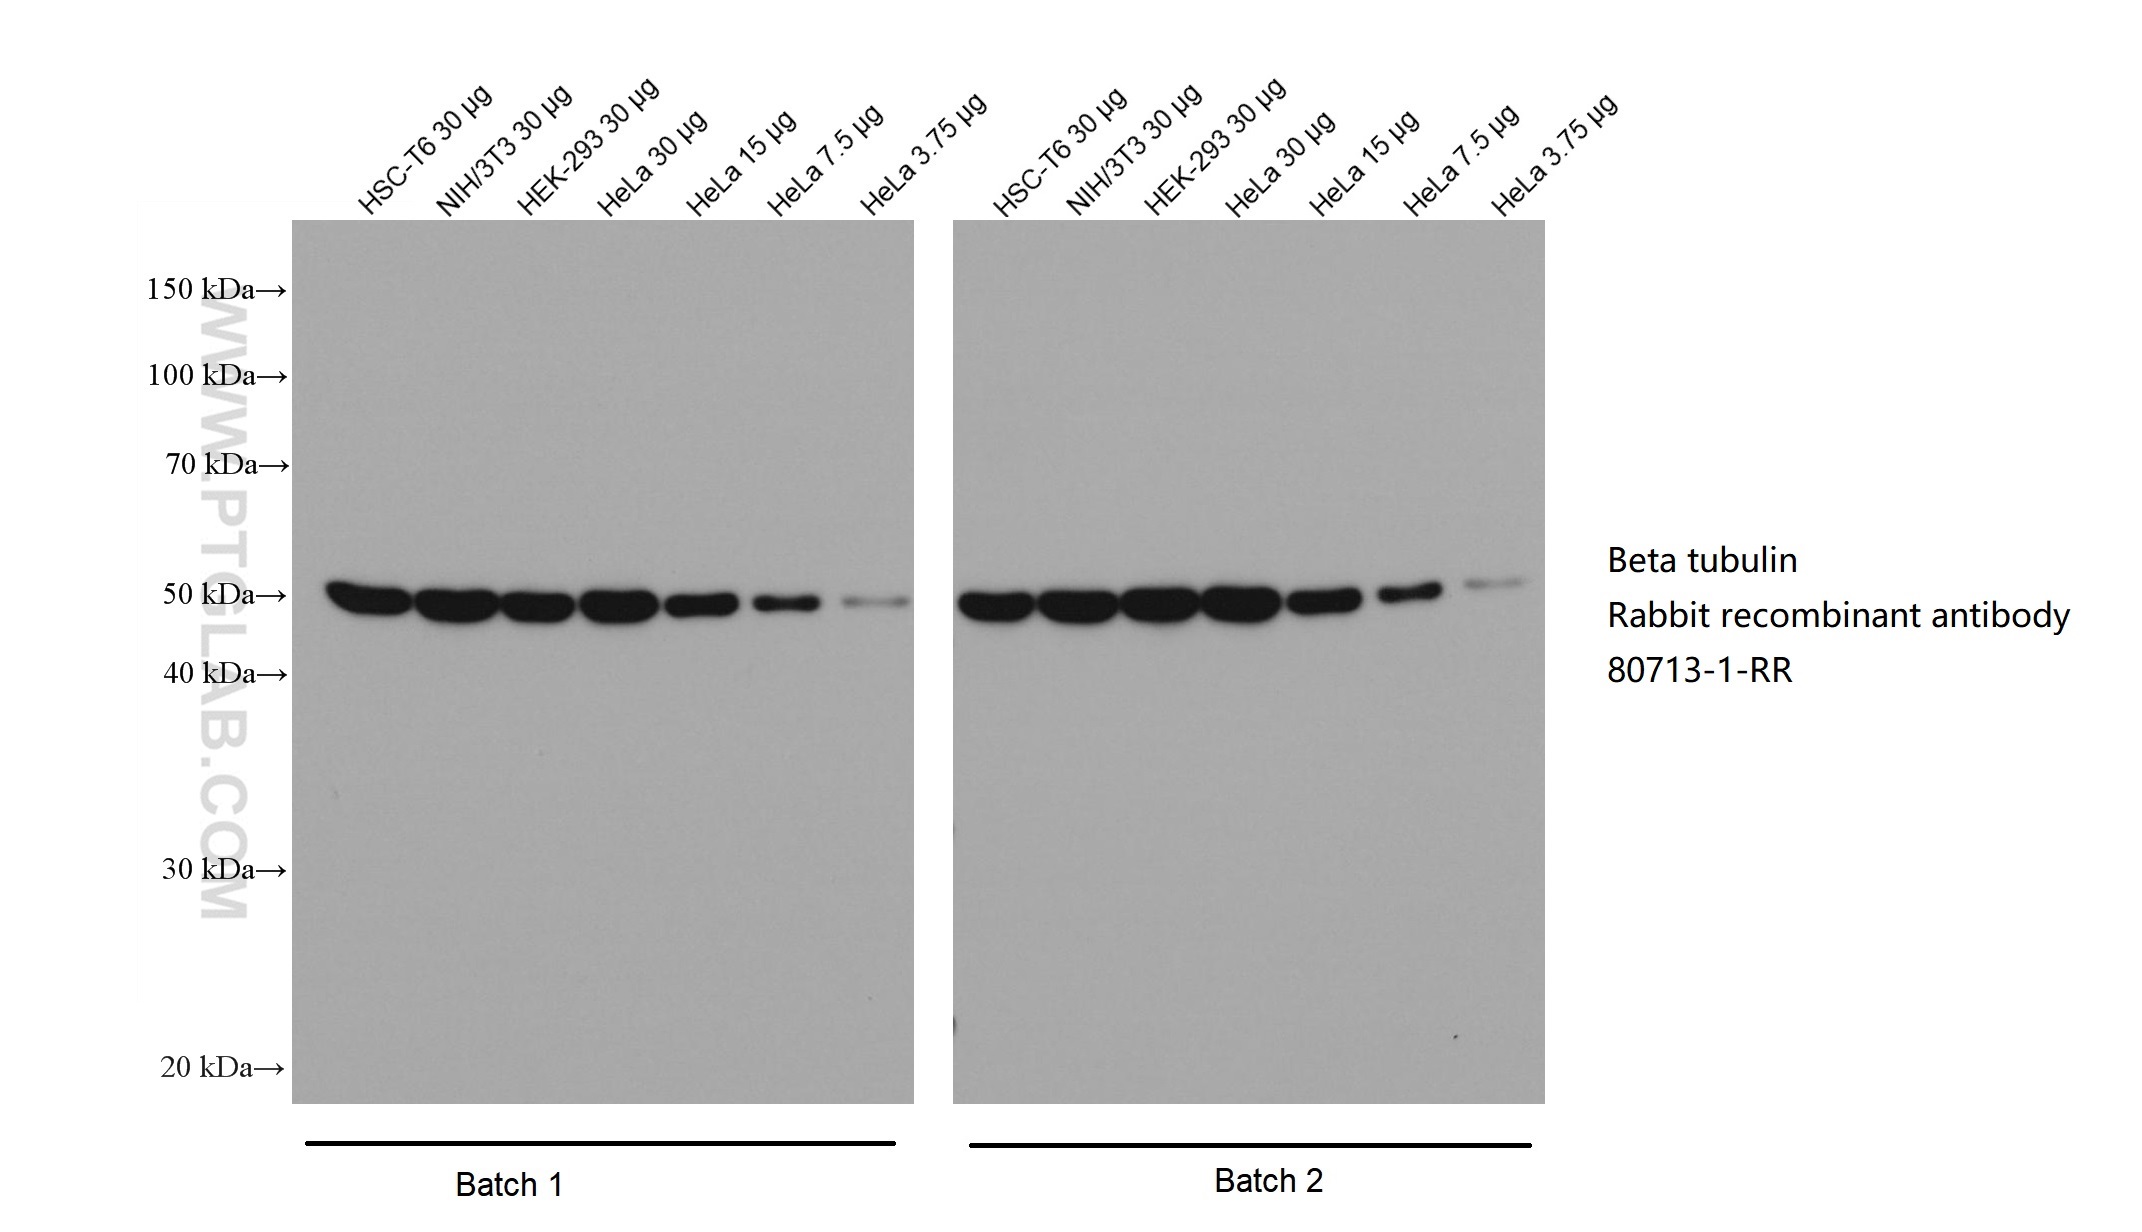 Various lysates were subjected to SDS-PAGE followed by western blot with Beta tubulin rabbit recombinant antibody (80713-1-RR) at dilution of 1:20000. Two batches of Multi-rAb HRP-Goat Anti-Rabbit Recombinant Secondary Antibody (H+L) (RGAR001) were used at 1:5000 for detection. 